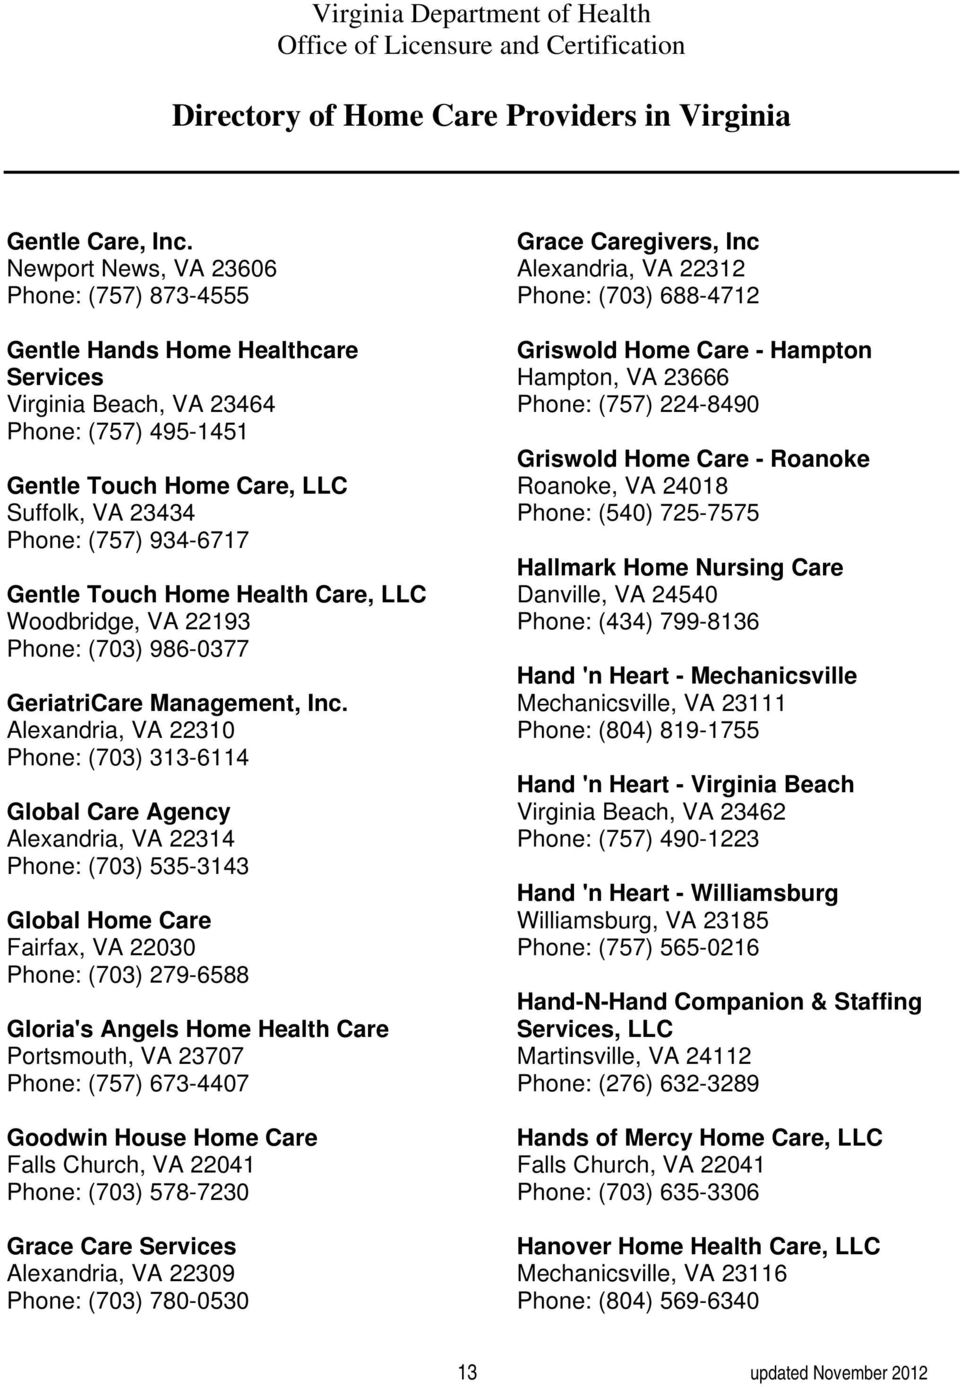 Directory Of Home Care Providers In Virginia Pdf Free Download